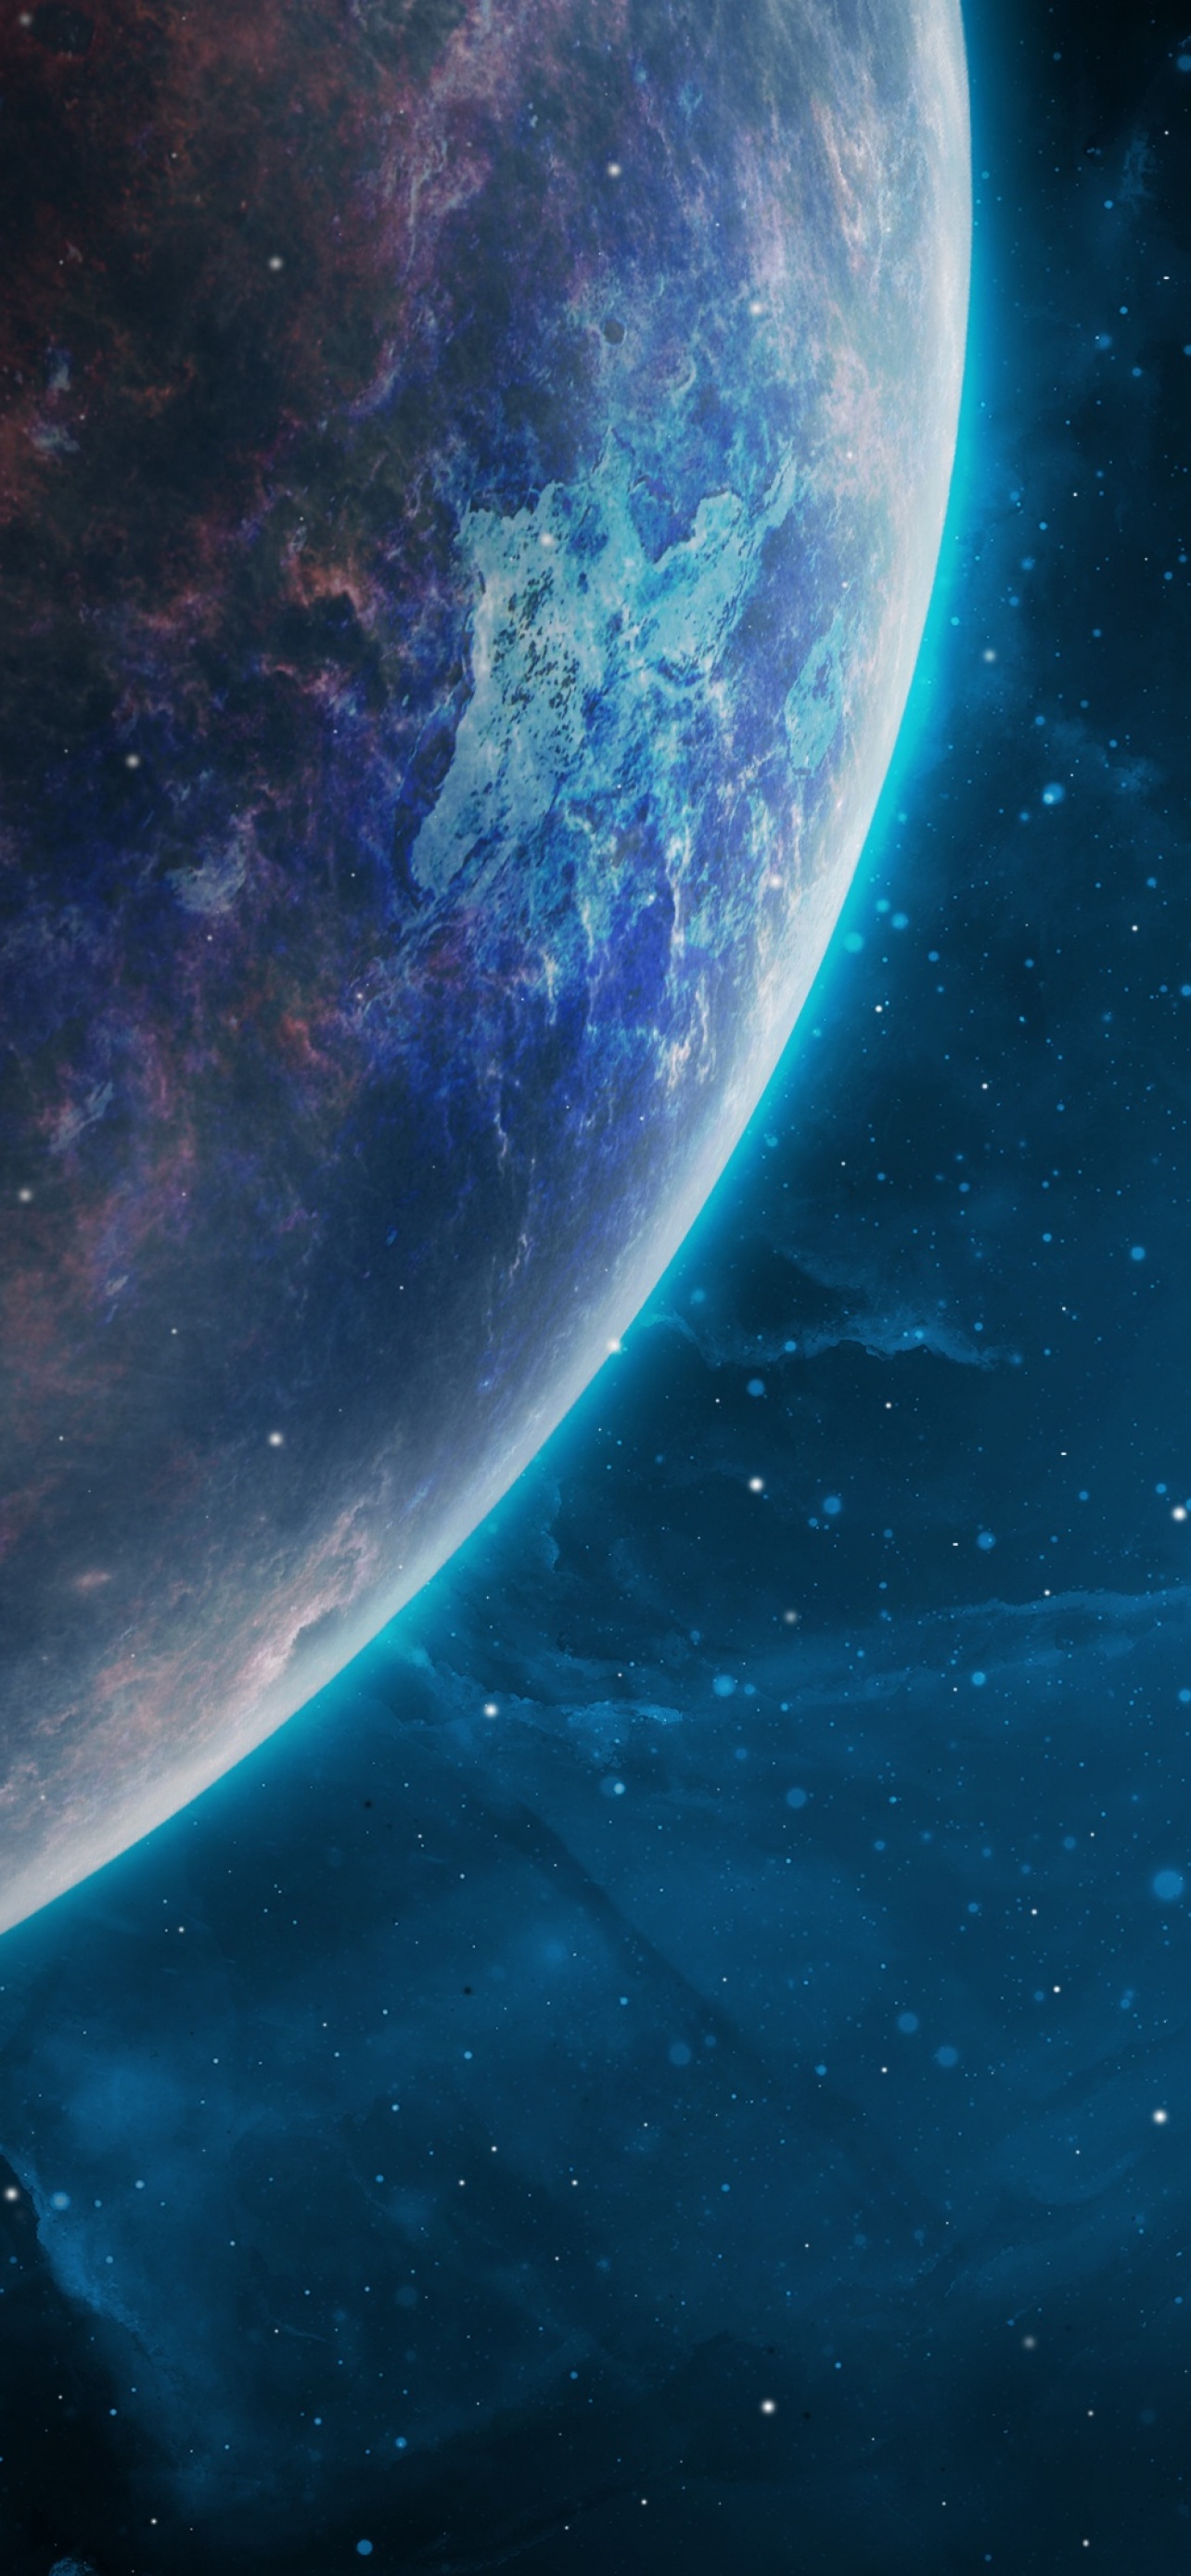 Space and planet wallpapers for iPhone and iPad